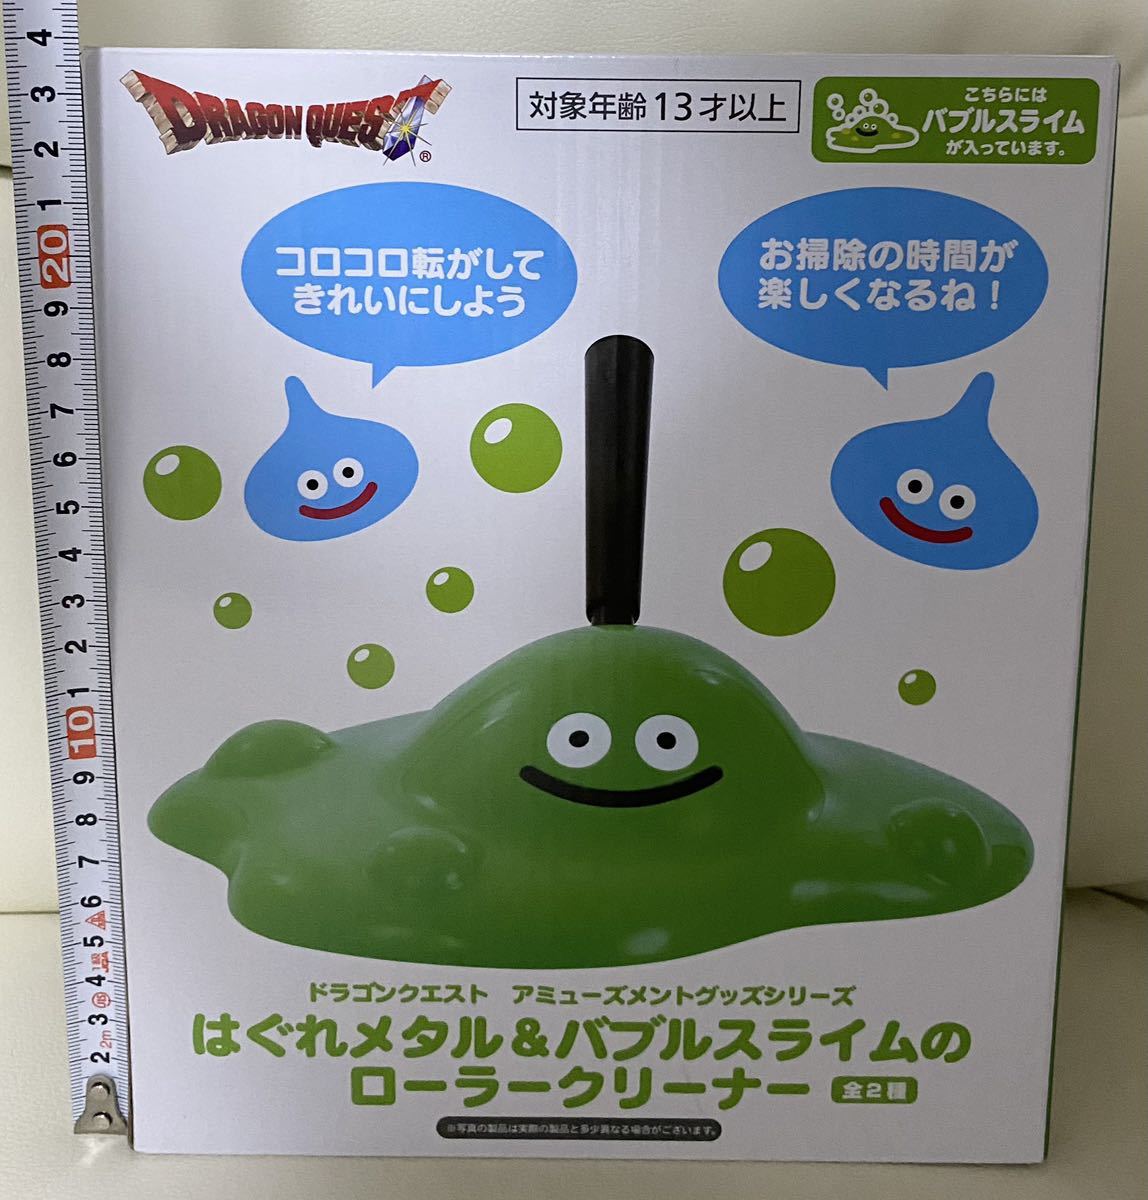  is .. metal & Bubble Sly m. roller cleaner Dragon Quest gong ke Bubble Sly m new goods roller ko Logo roDRAGON QUEST